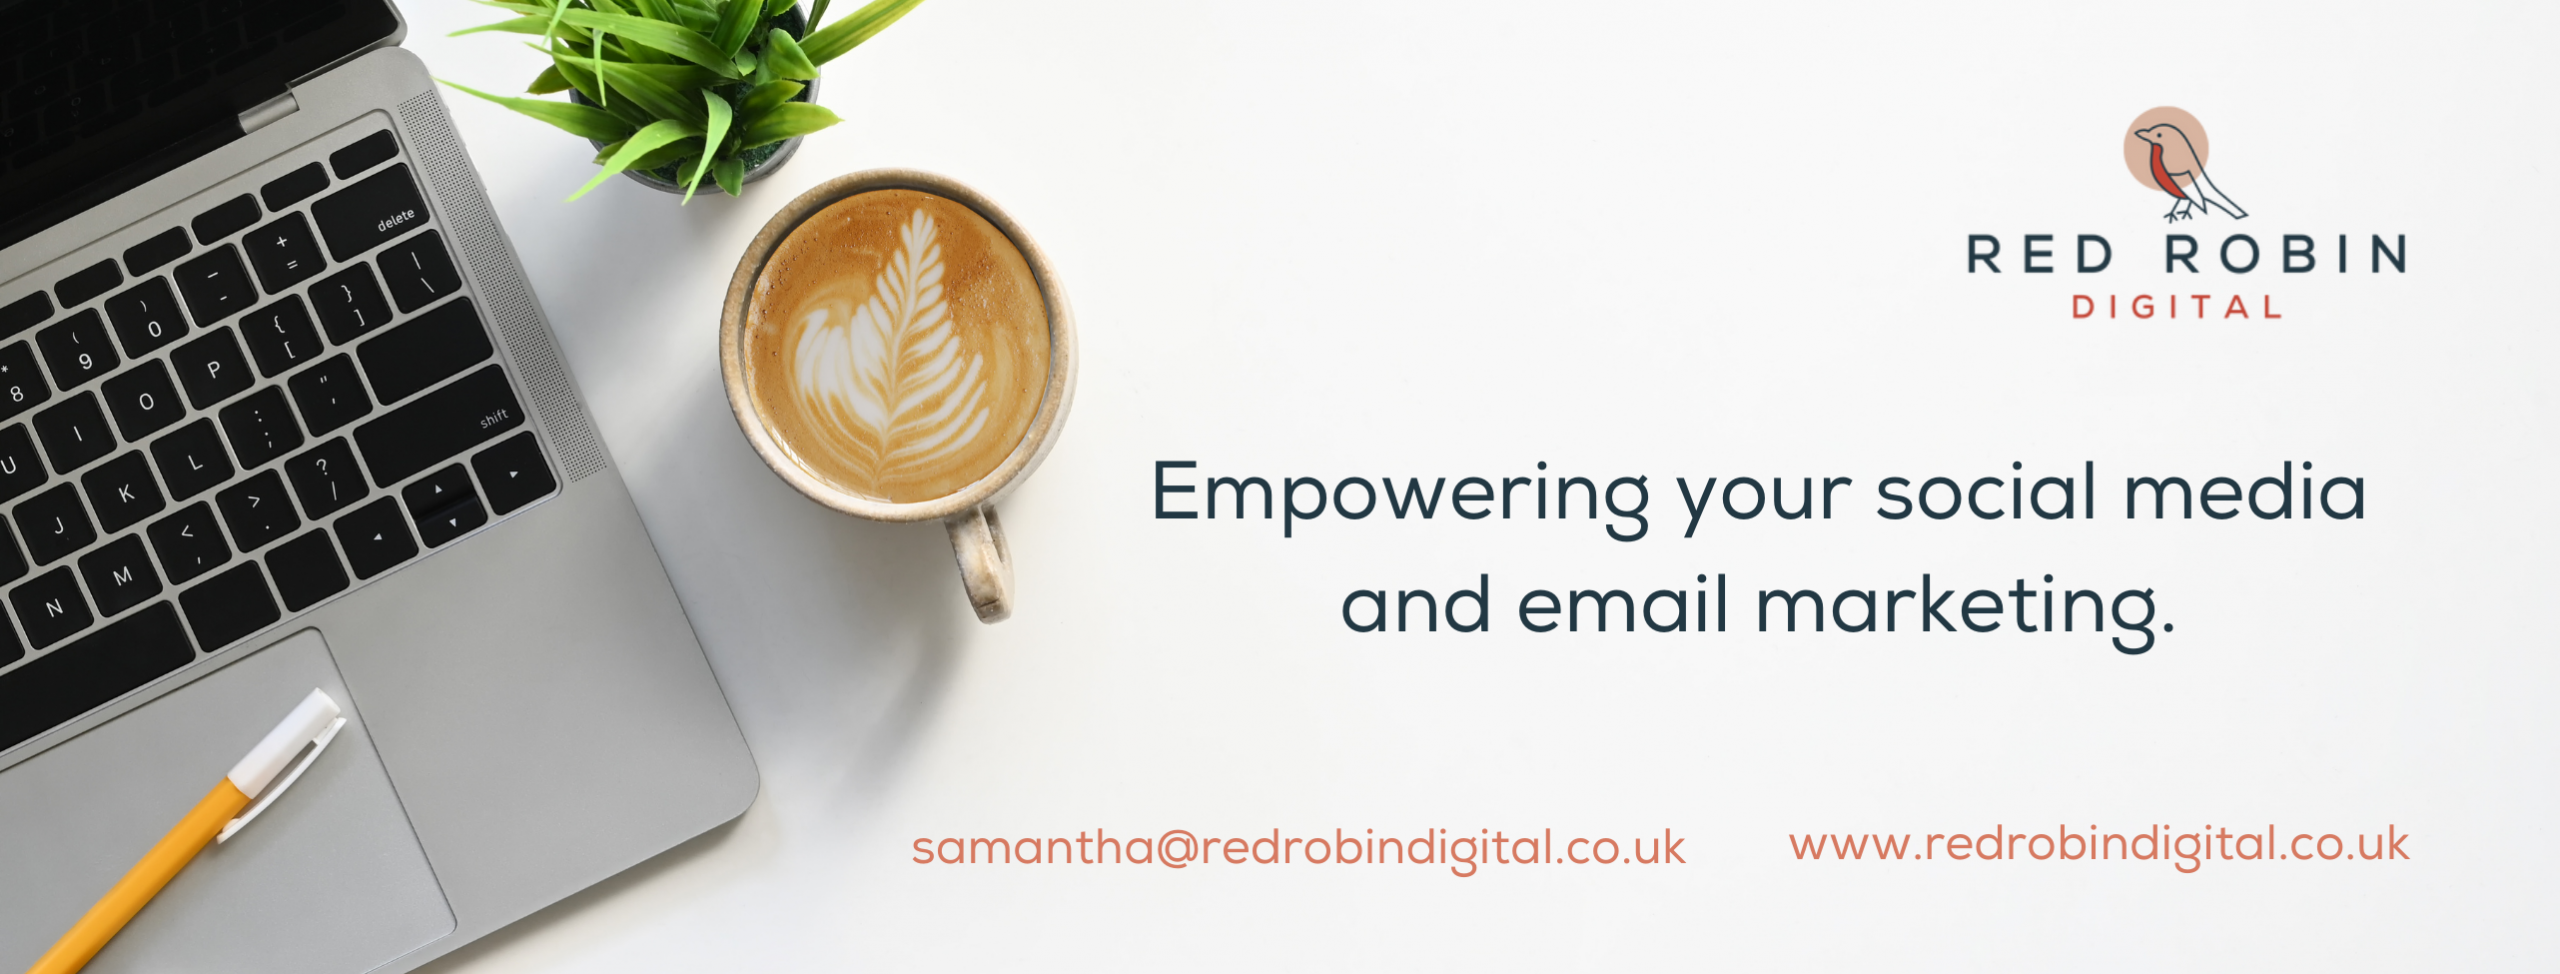 Red Robin Digital - Empowering your Social Media & Email Marketing